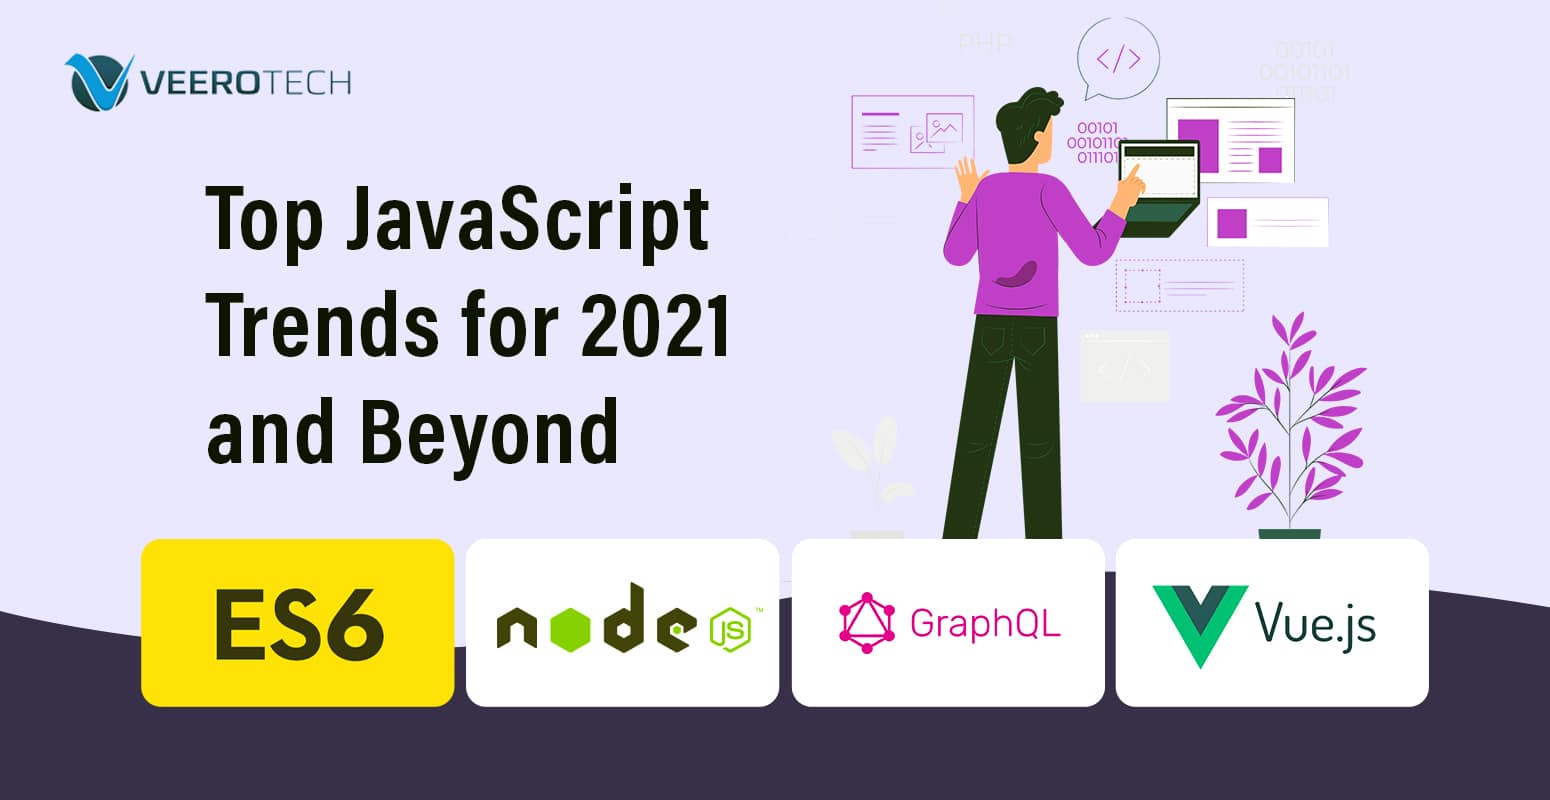 Top JavaScript Trends for 2021 and Beyond